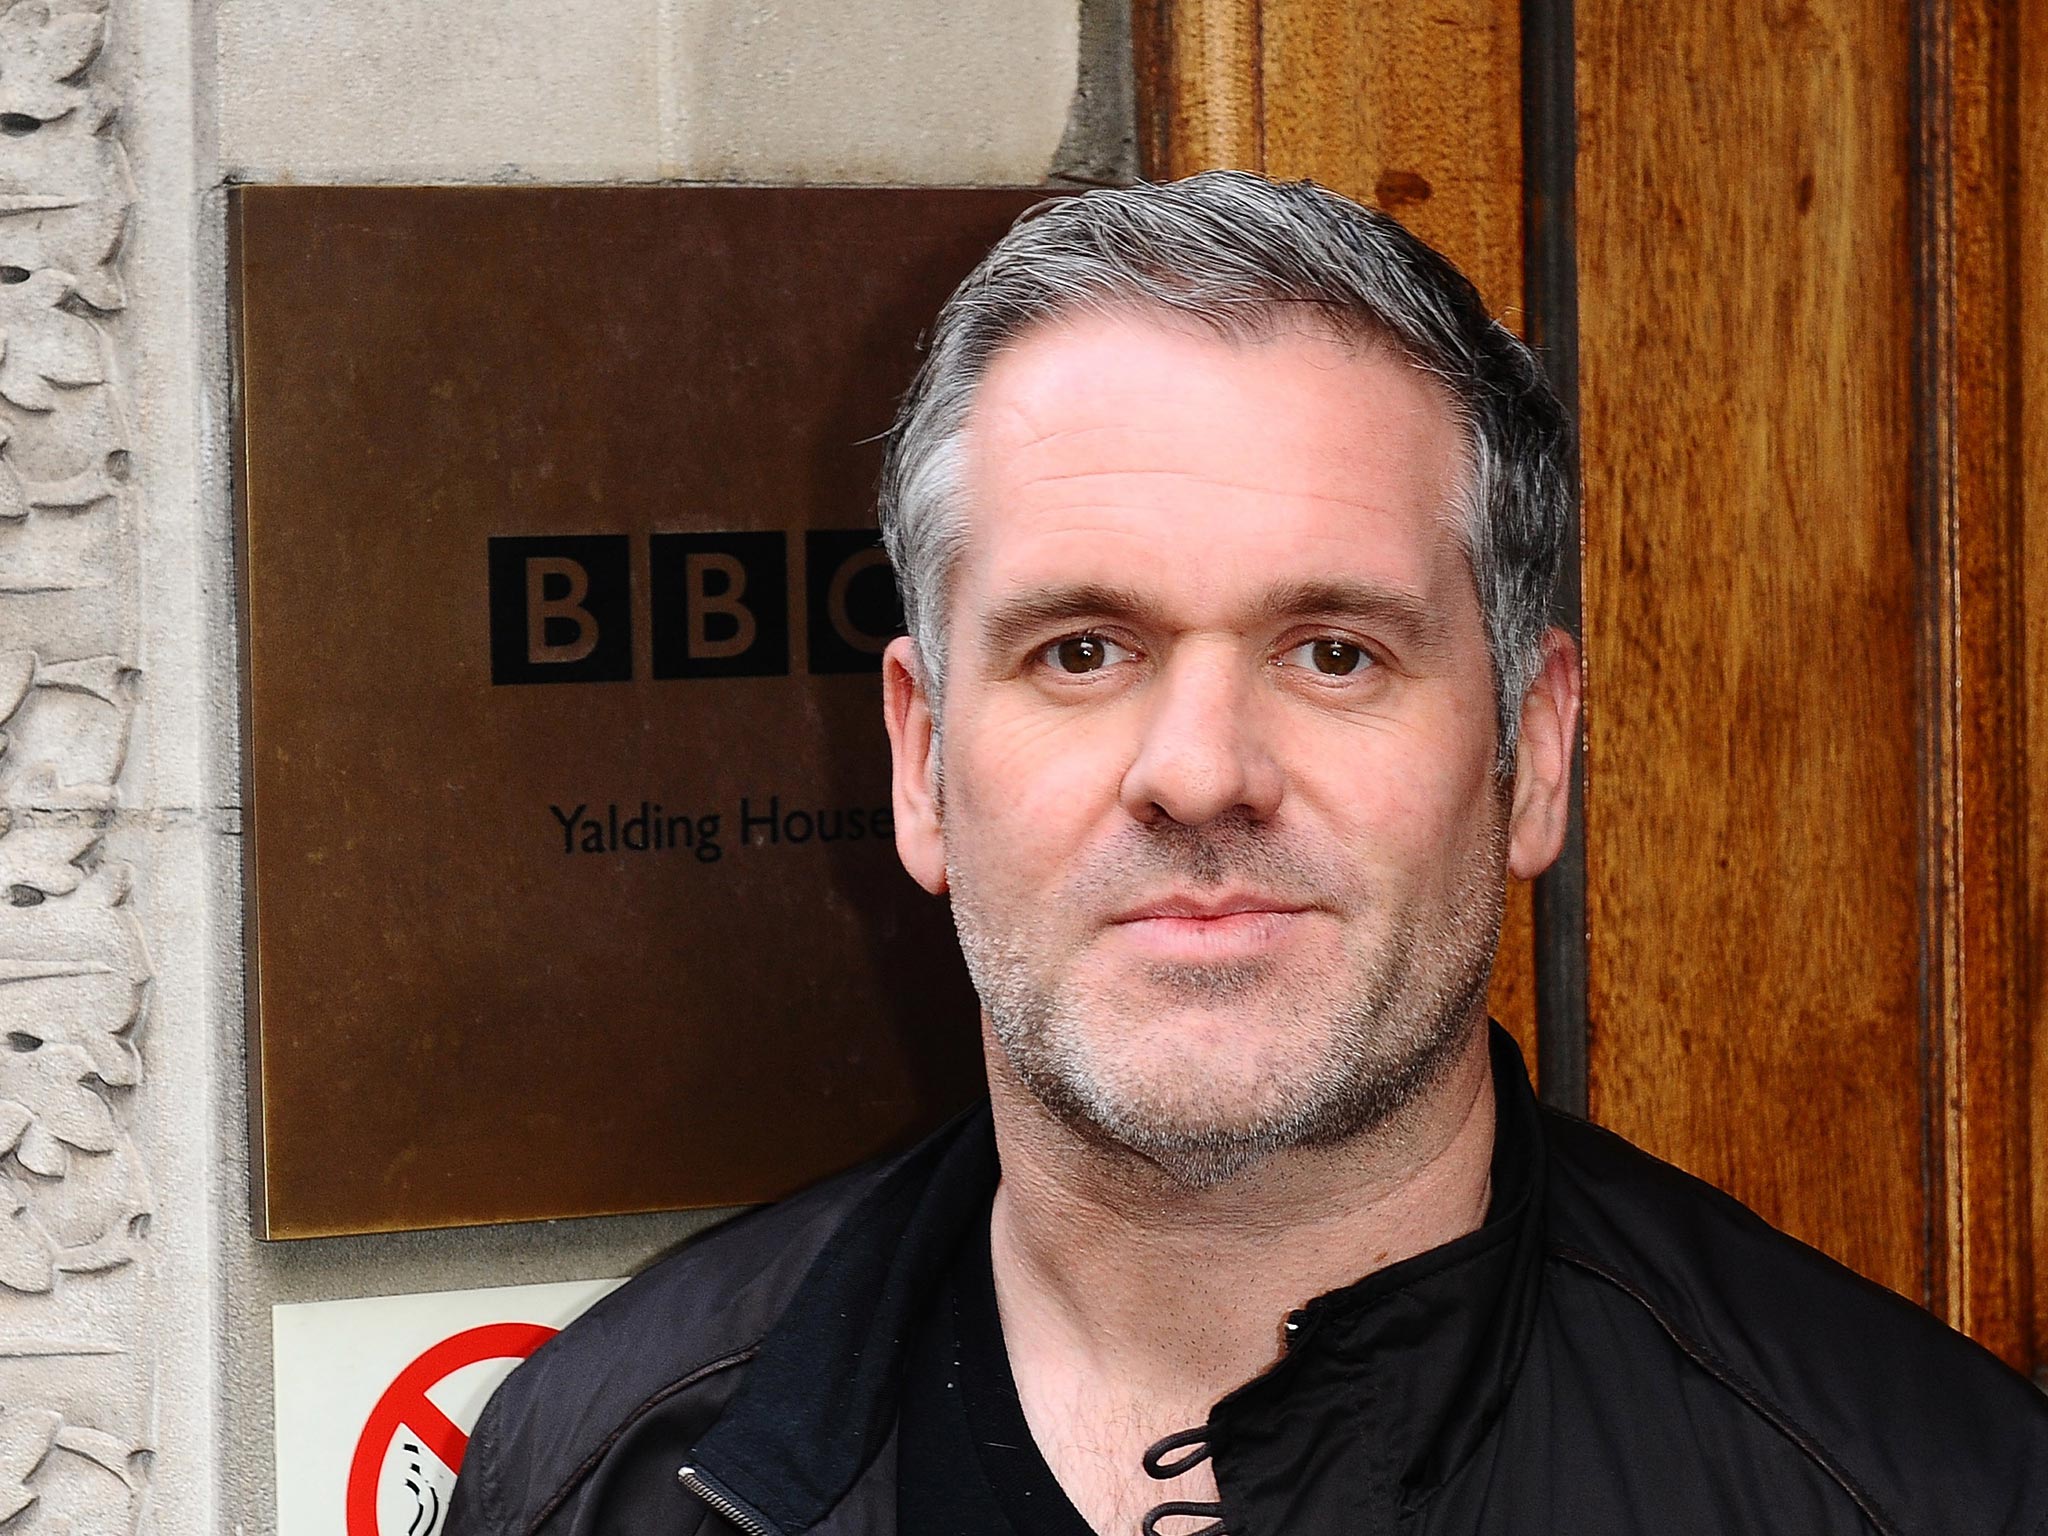 DJ Chris Moyles who claimed to be a second-hand car dealer in a bid to save up to £1 million in tax, a tribunal has found